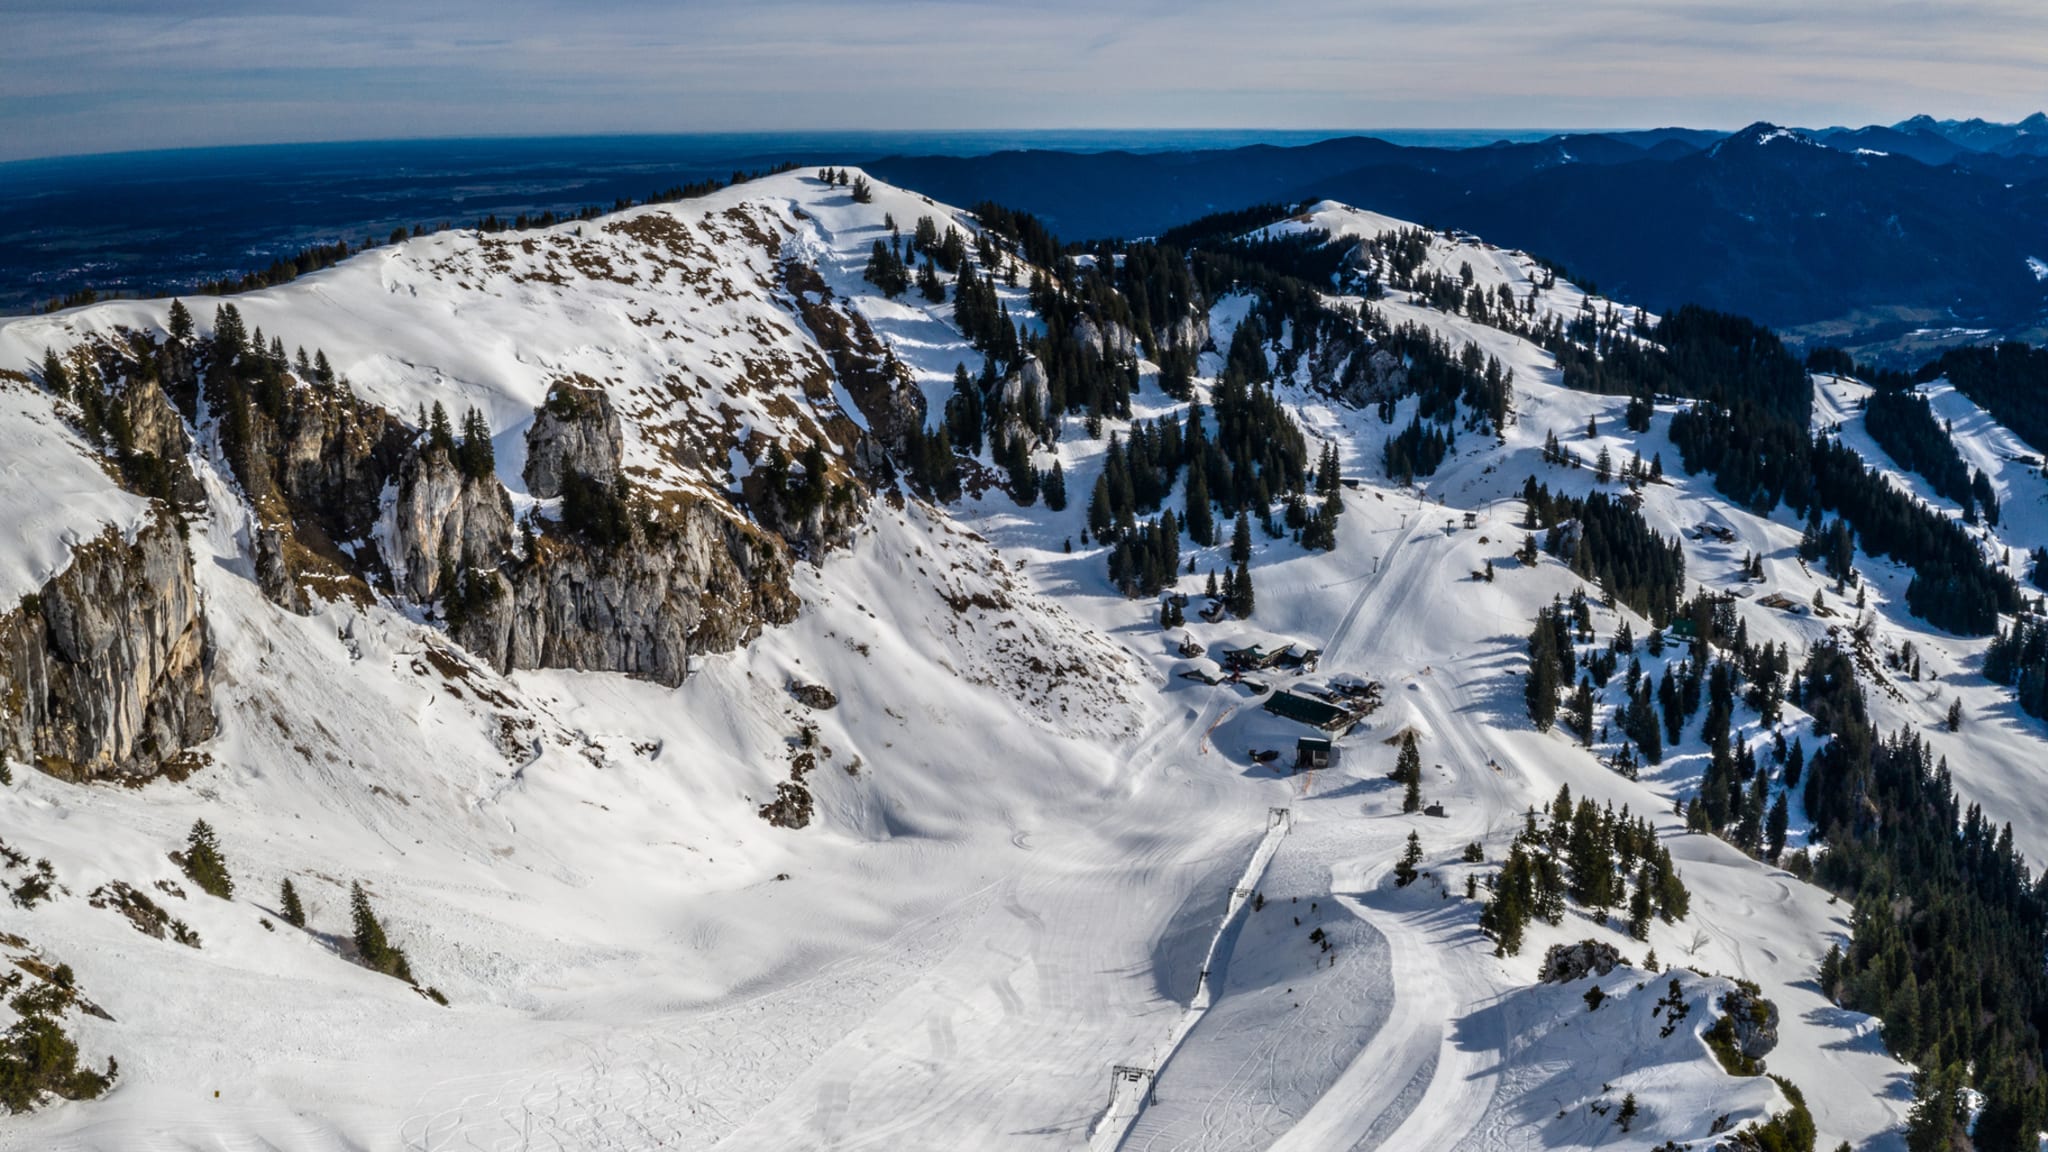 Skigebiet Brauneck-Lenggries, Bayern © Frederick Thelen/iStock / Getty Images Plus via Getty Images